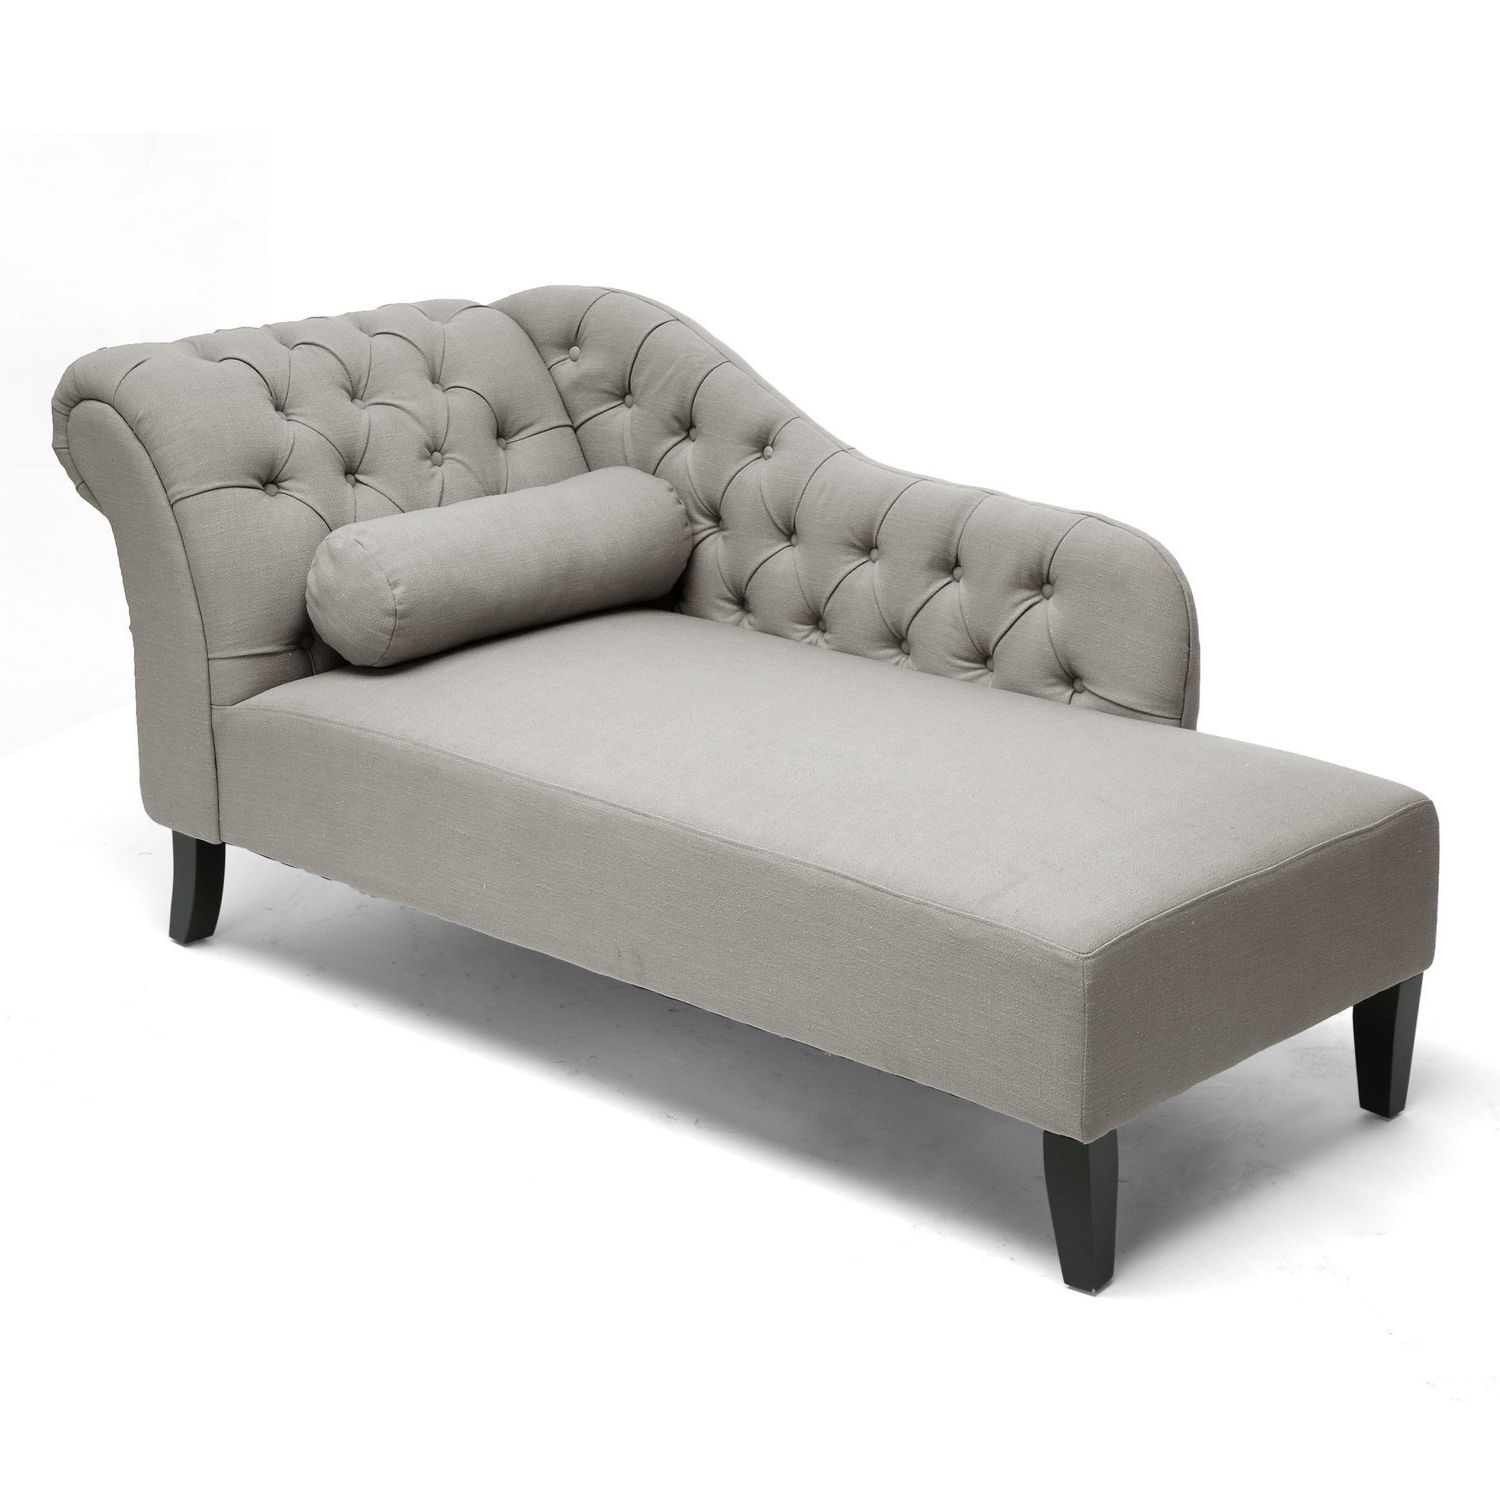 2017 Gray Chaises For Amazon: Baxton Studio Aphrodite Tufted Putty Linen Modern (View 10 of 15)